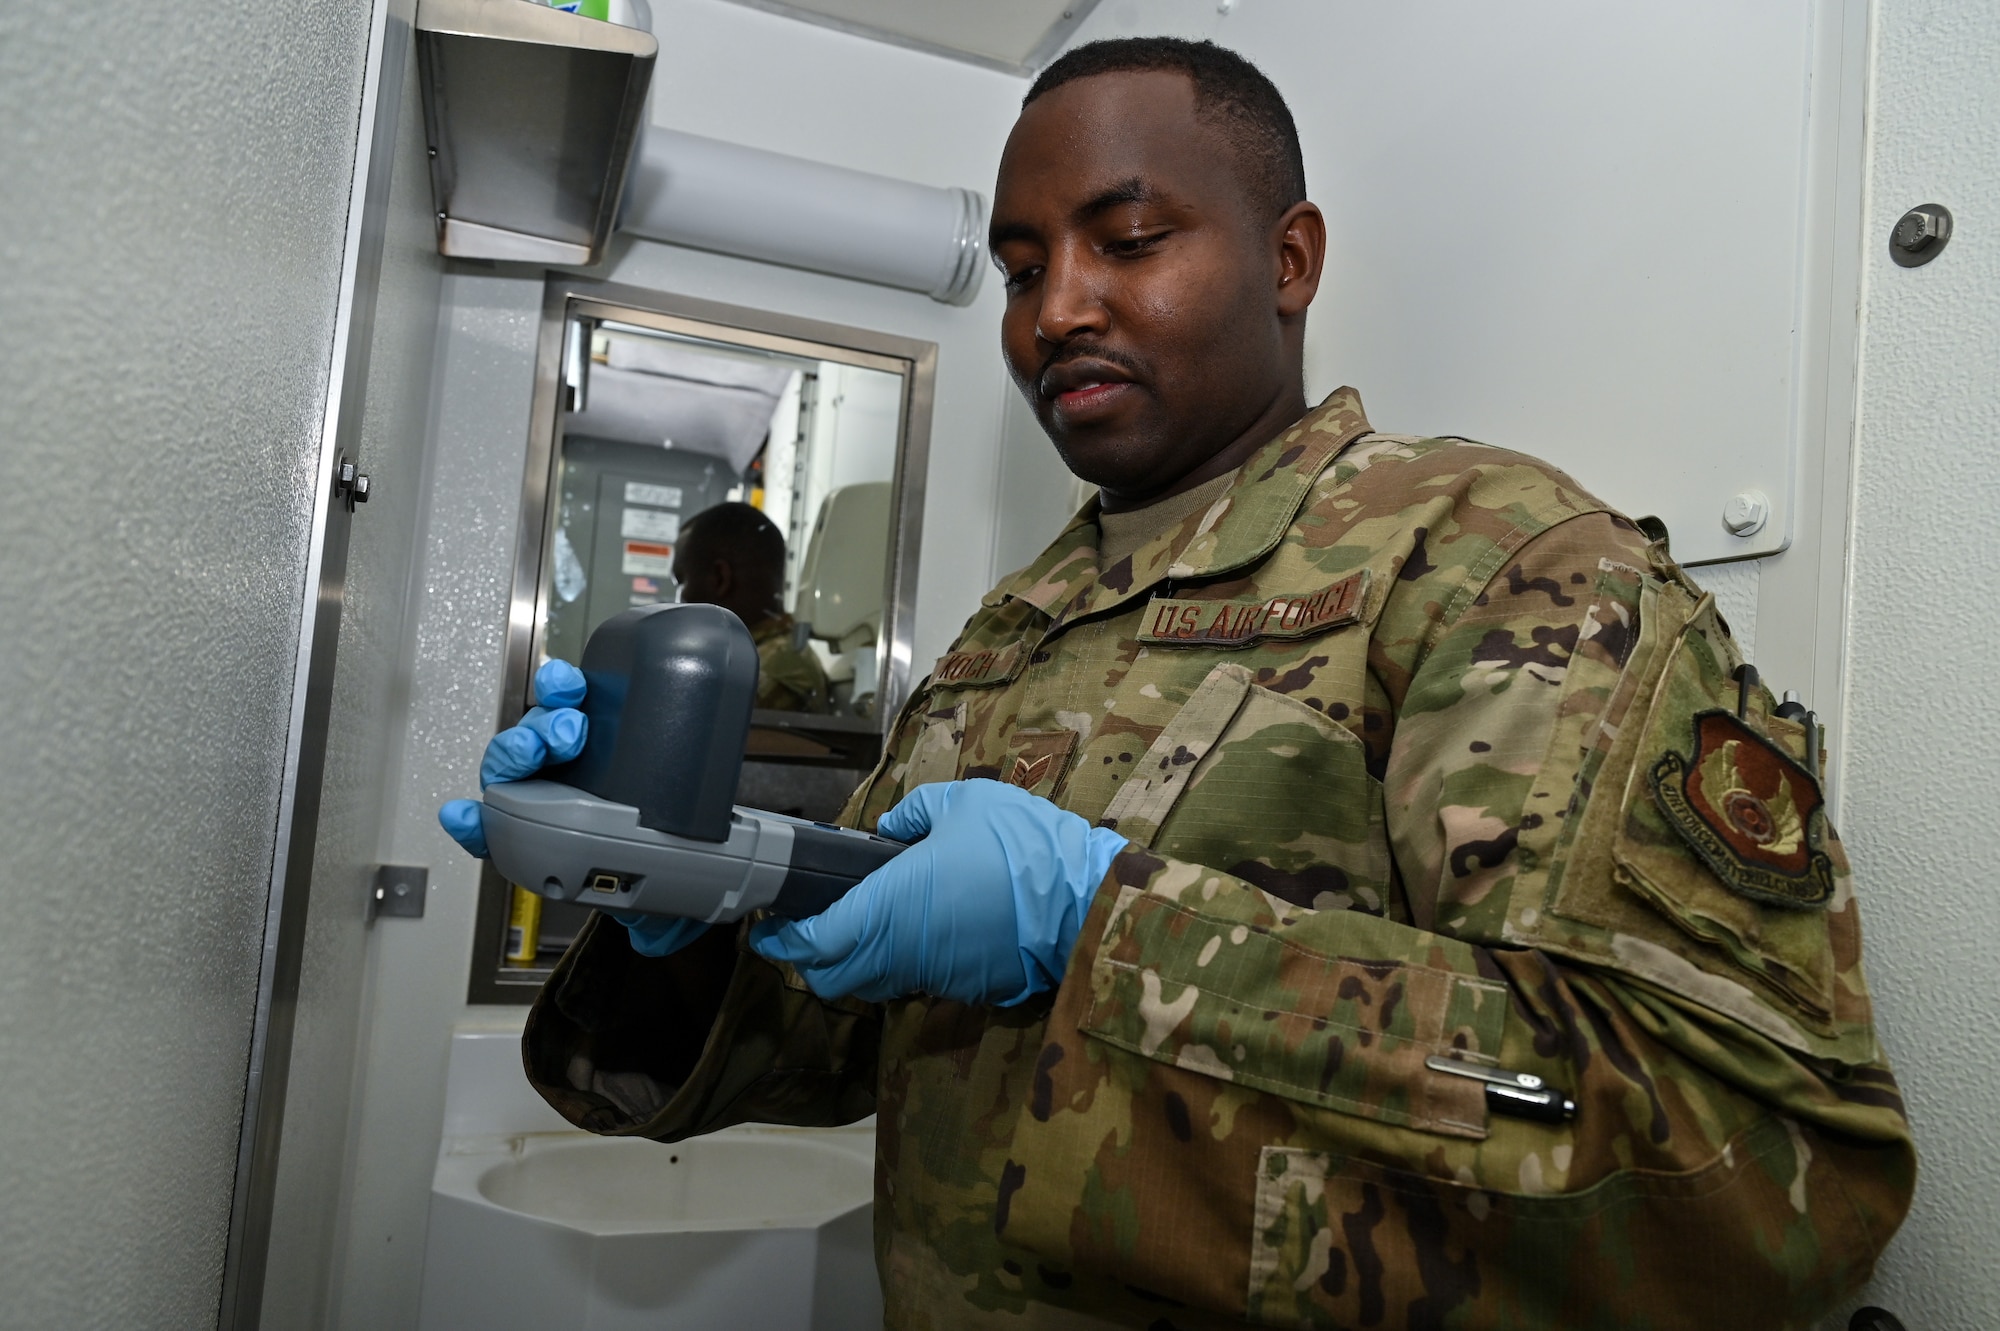 Staff Sgt. Enock Koech, U.S. Air Force School of Aerospace Medicine bioenvironmental engineer, takes samples at L-01 missile alert facility, or MAF, near Stoneham, Colorado, July 13, 2023. USAFSAM teams visited all of F.E. Warren Air Force Base’s MAFs as part of the ongoing missile community cancer study at all three intercontinental ballistic missile wings in Air Force Global Strike Command. While there, the teams assessed indoor air quality at each facility to include temperature, humidity, carbon dioxide and carbon monoxide levels. They also collected water and soil samples and tested for the presence of radon, polychlorinated biphenyls, organic phosphates and other potential occupational exposure hazards. USAFSAM is part of the Air Force Research Laboratory’s 711th Human Performance Wing. (U.S. Air Force photo by Joseph Coslett Jr.)